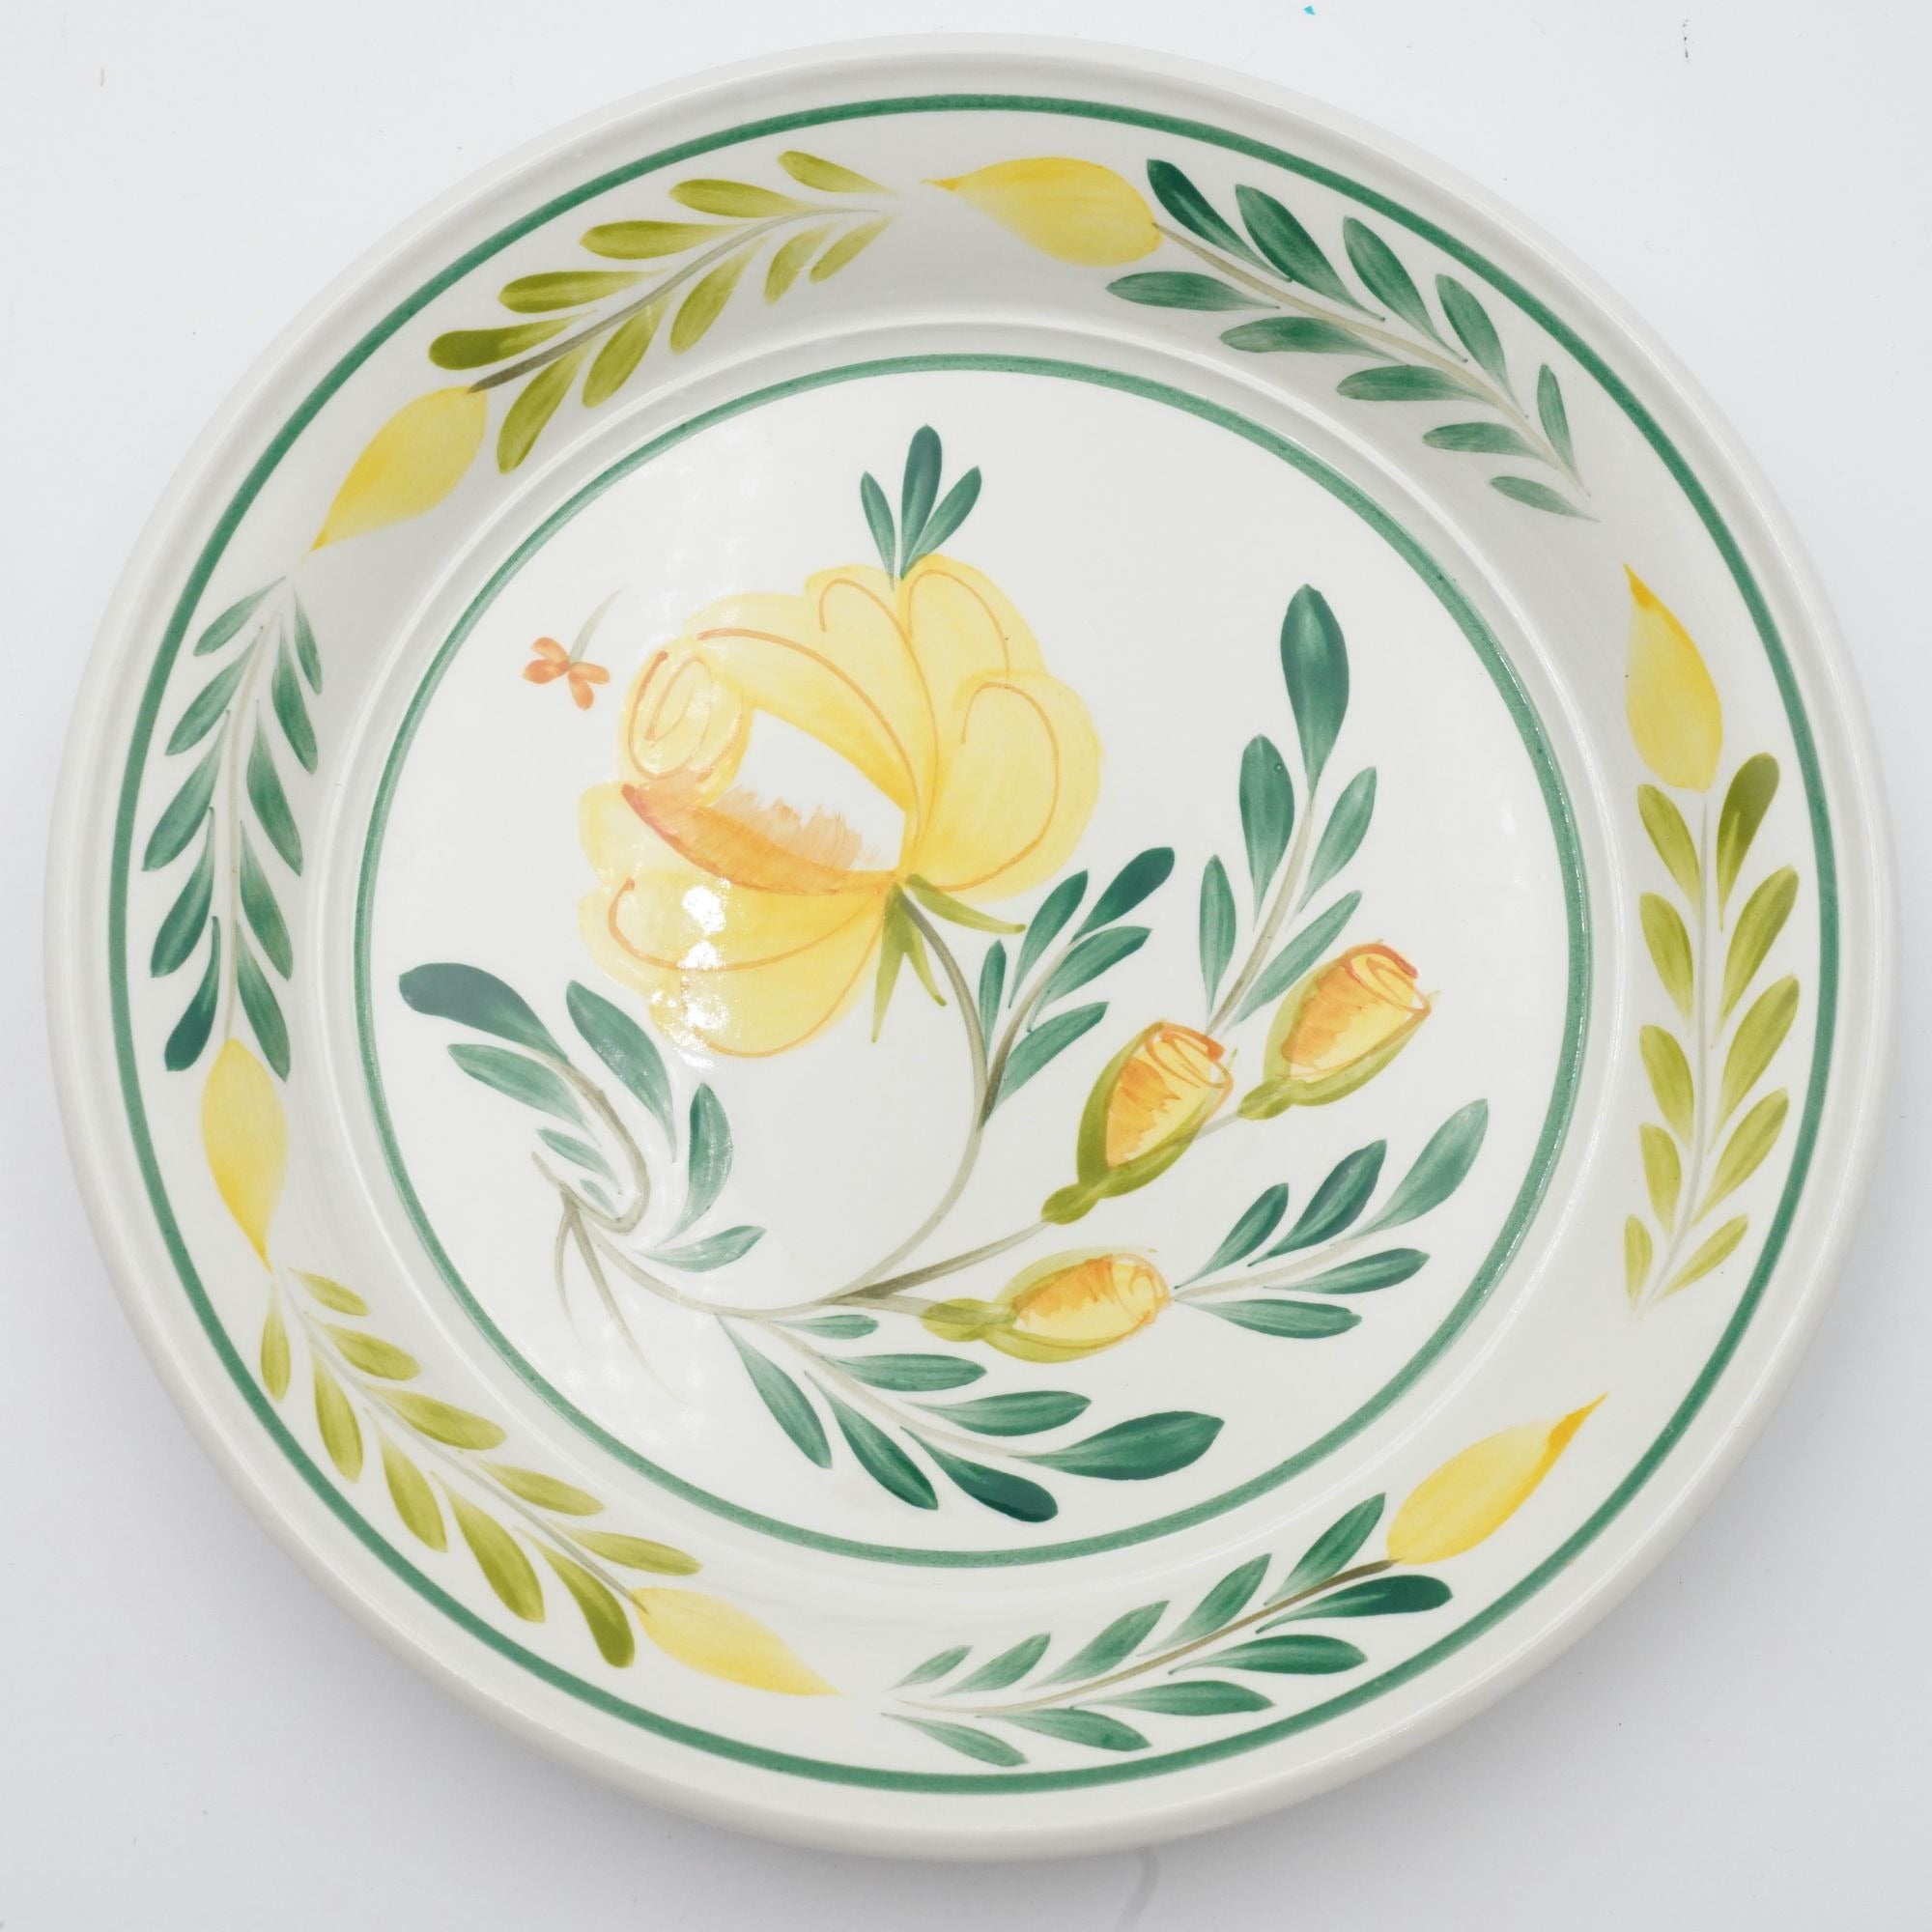 Macy's Hand-Painted Yellow Rose 8.5" Salad Plate by Portmeirion in Britain